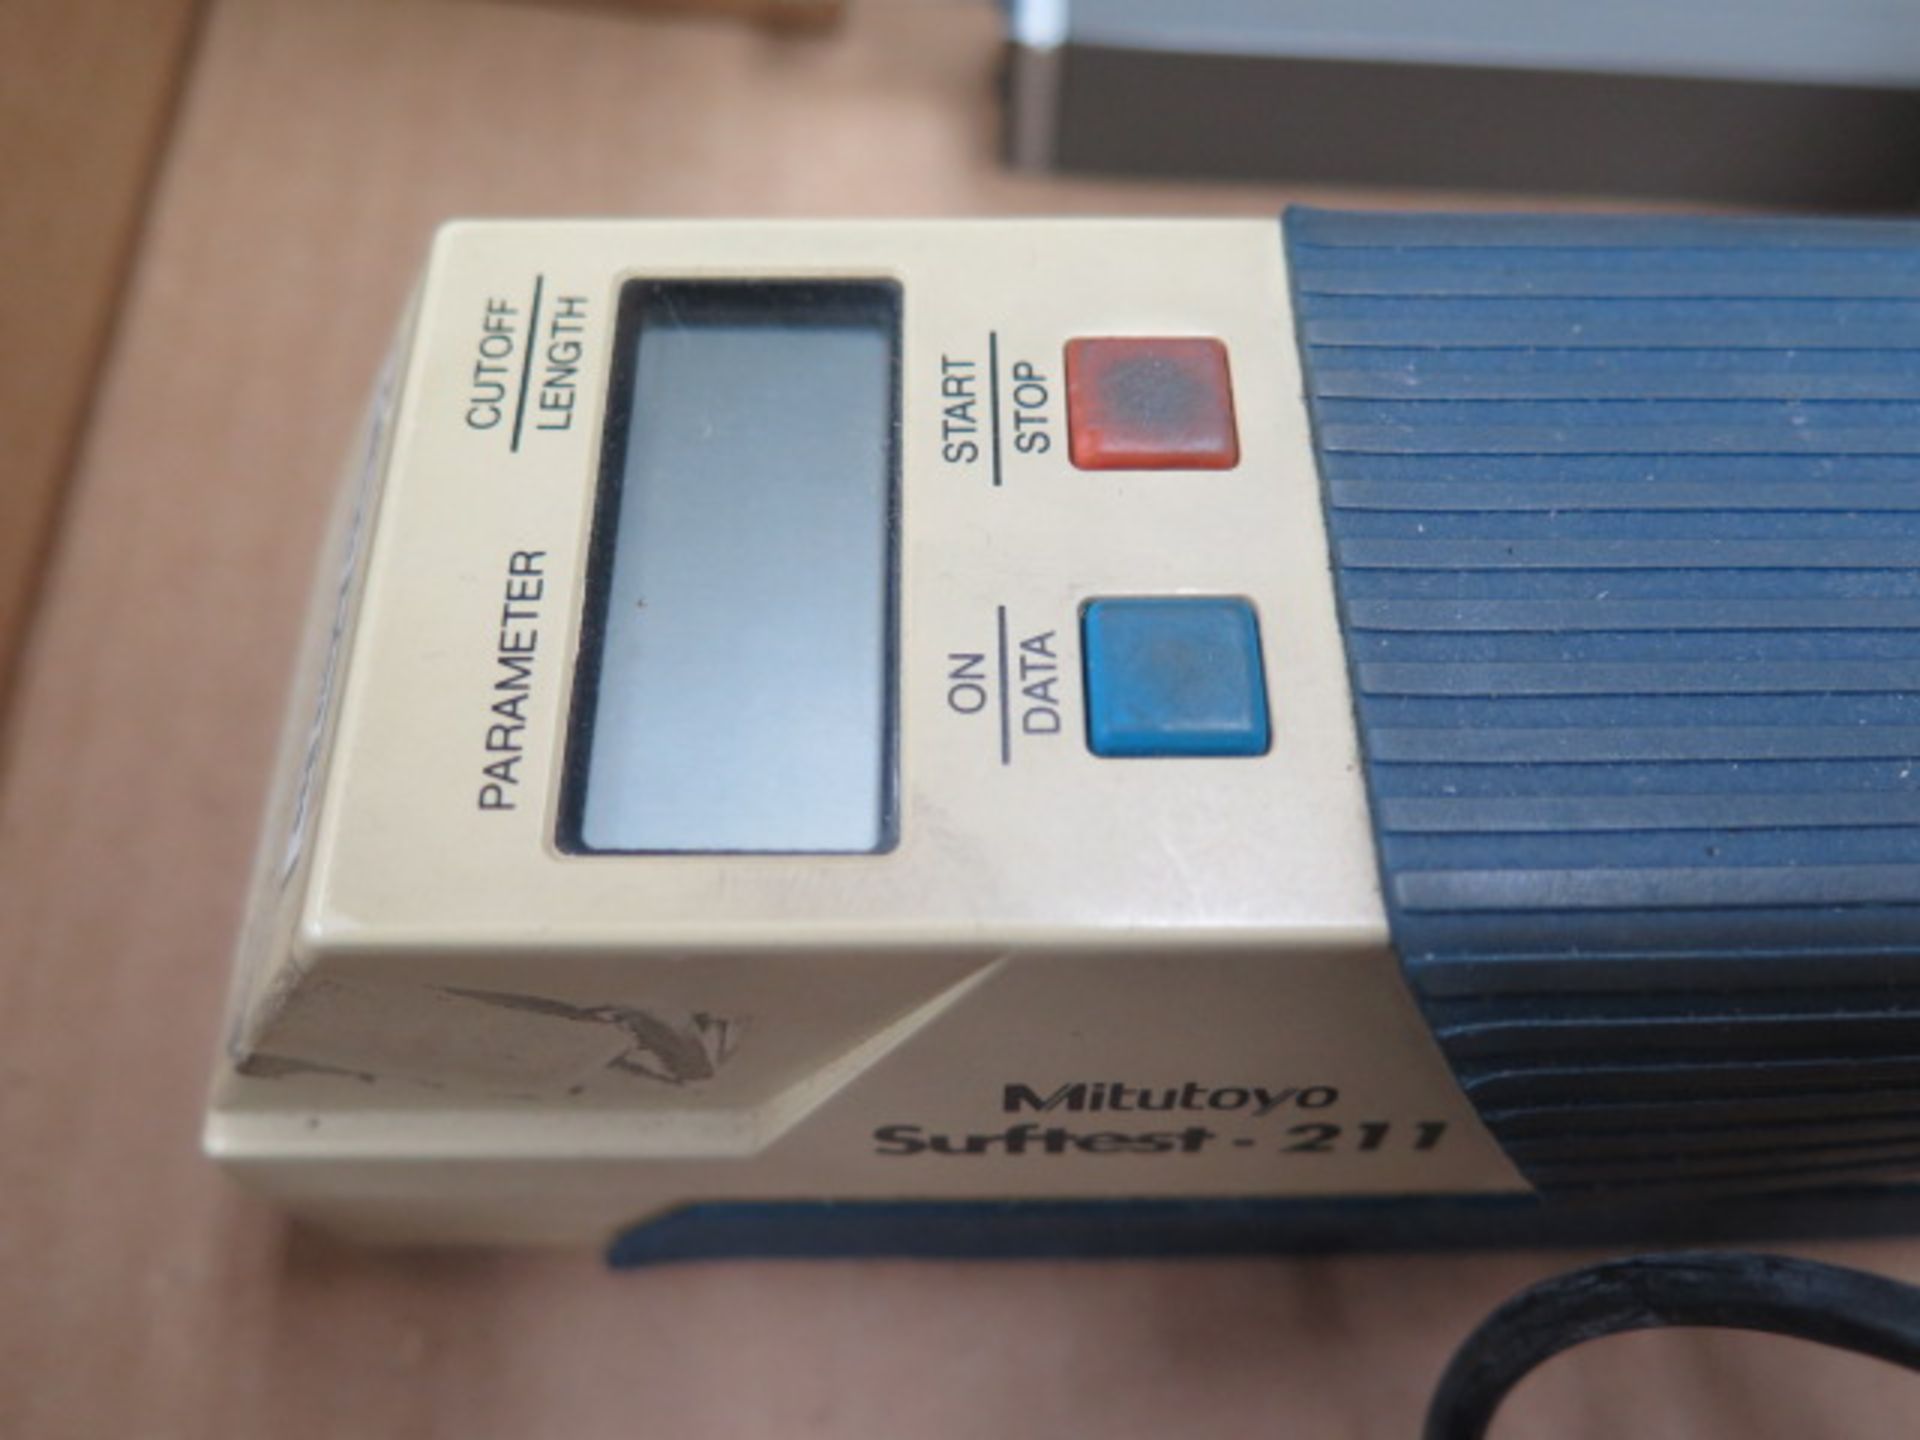 Mitutoyo Surftest-211 Digital Surface Roughness Gage (SOLD AS-IS - NO WARRANTY) - Image 4 of 6